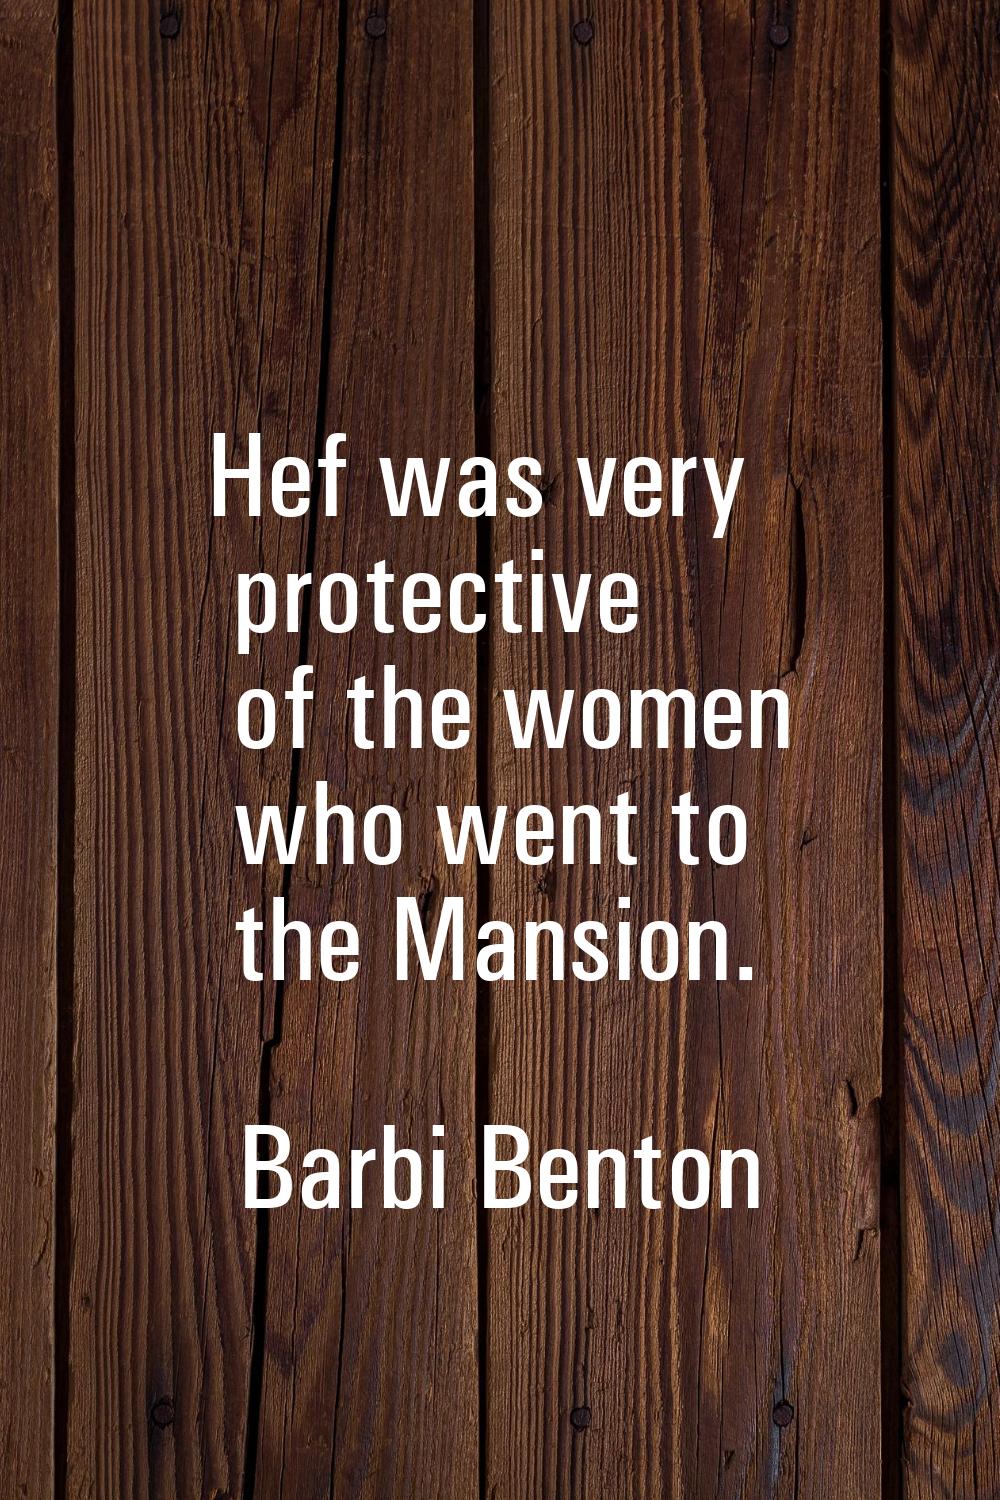 Hef was very protective of the women who went to the Mansion.